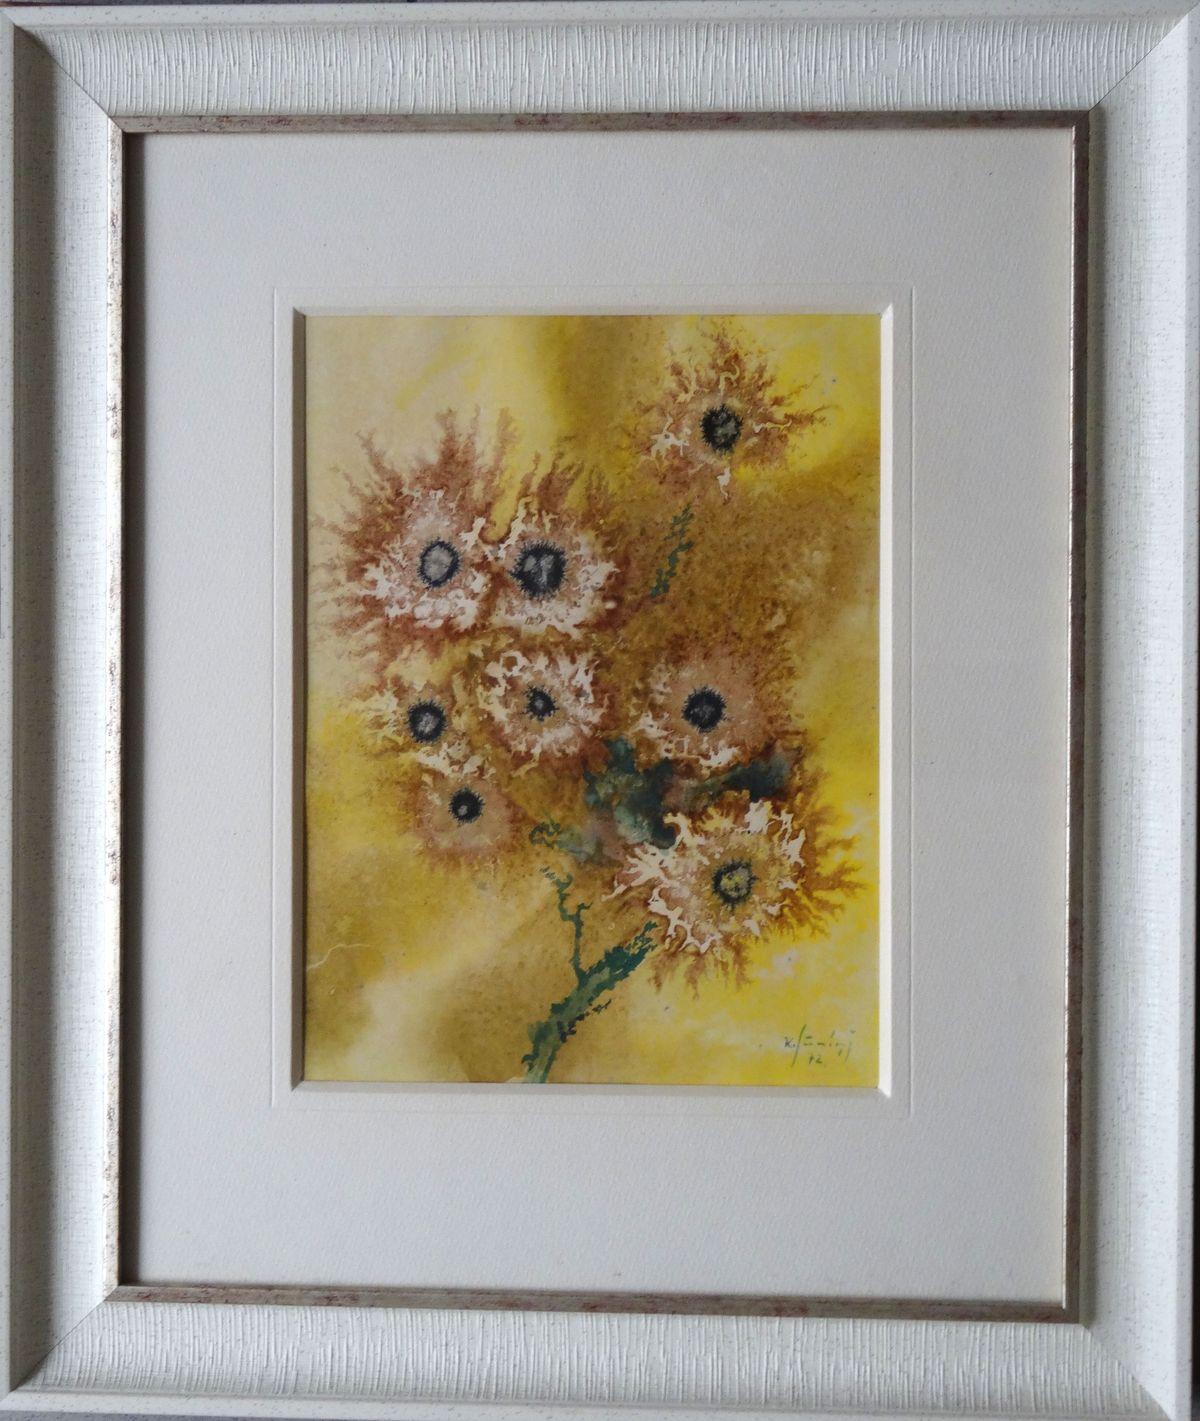 Flowers. 1972, paper, watercolor, 31x23 cm - Painting by Karlis Sunins